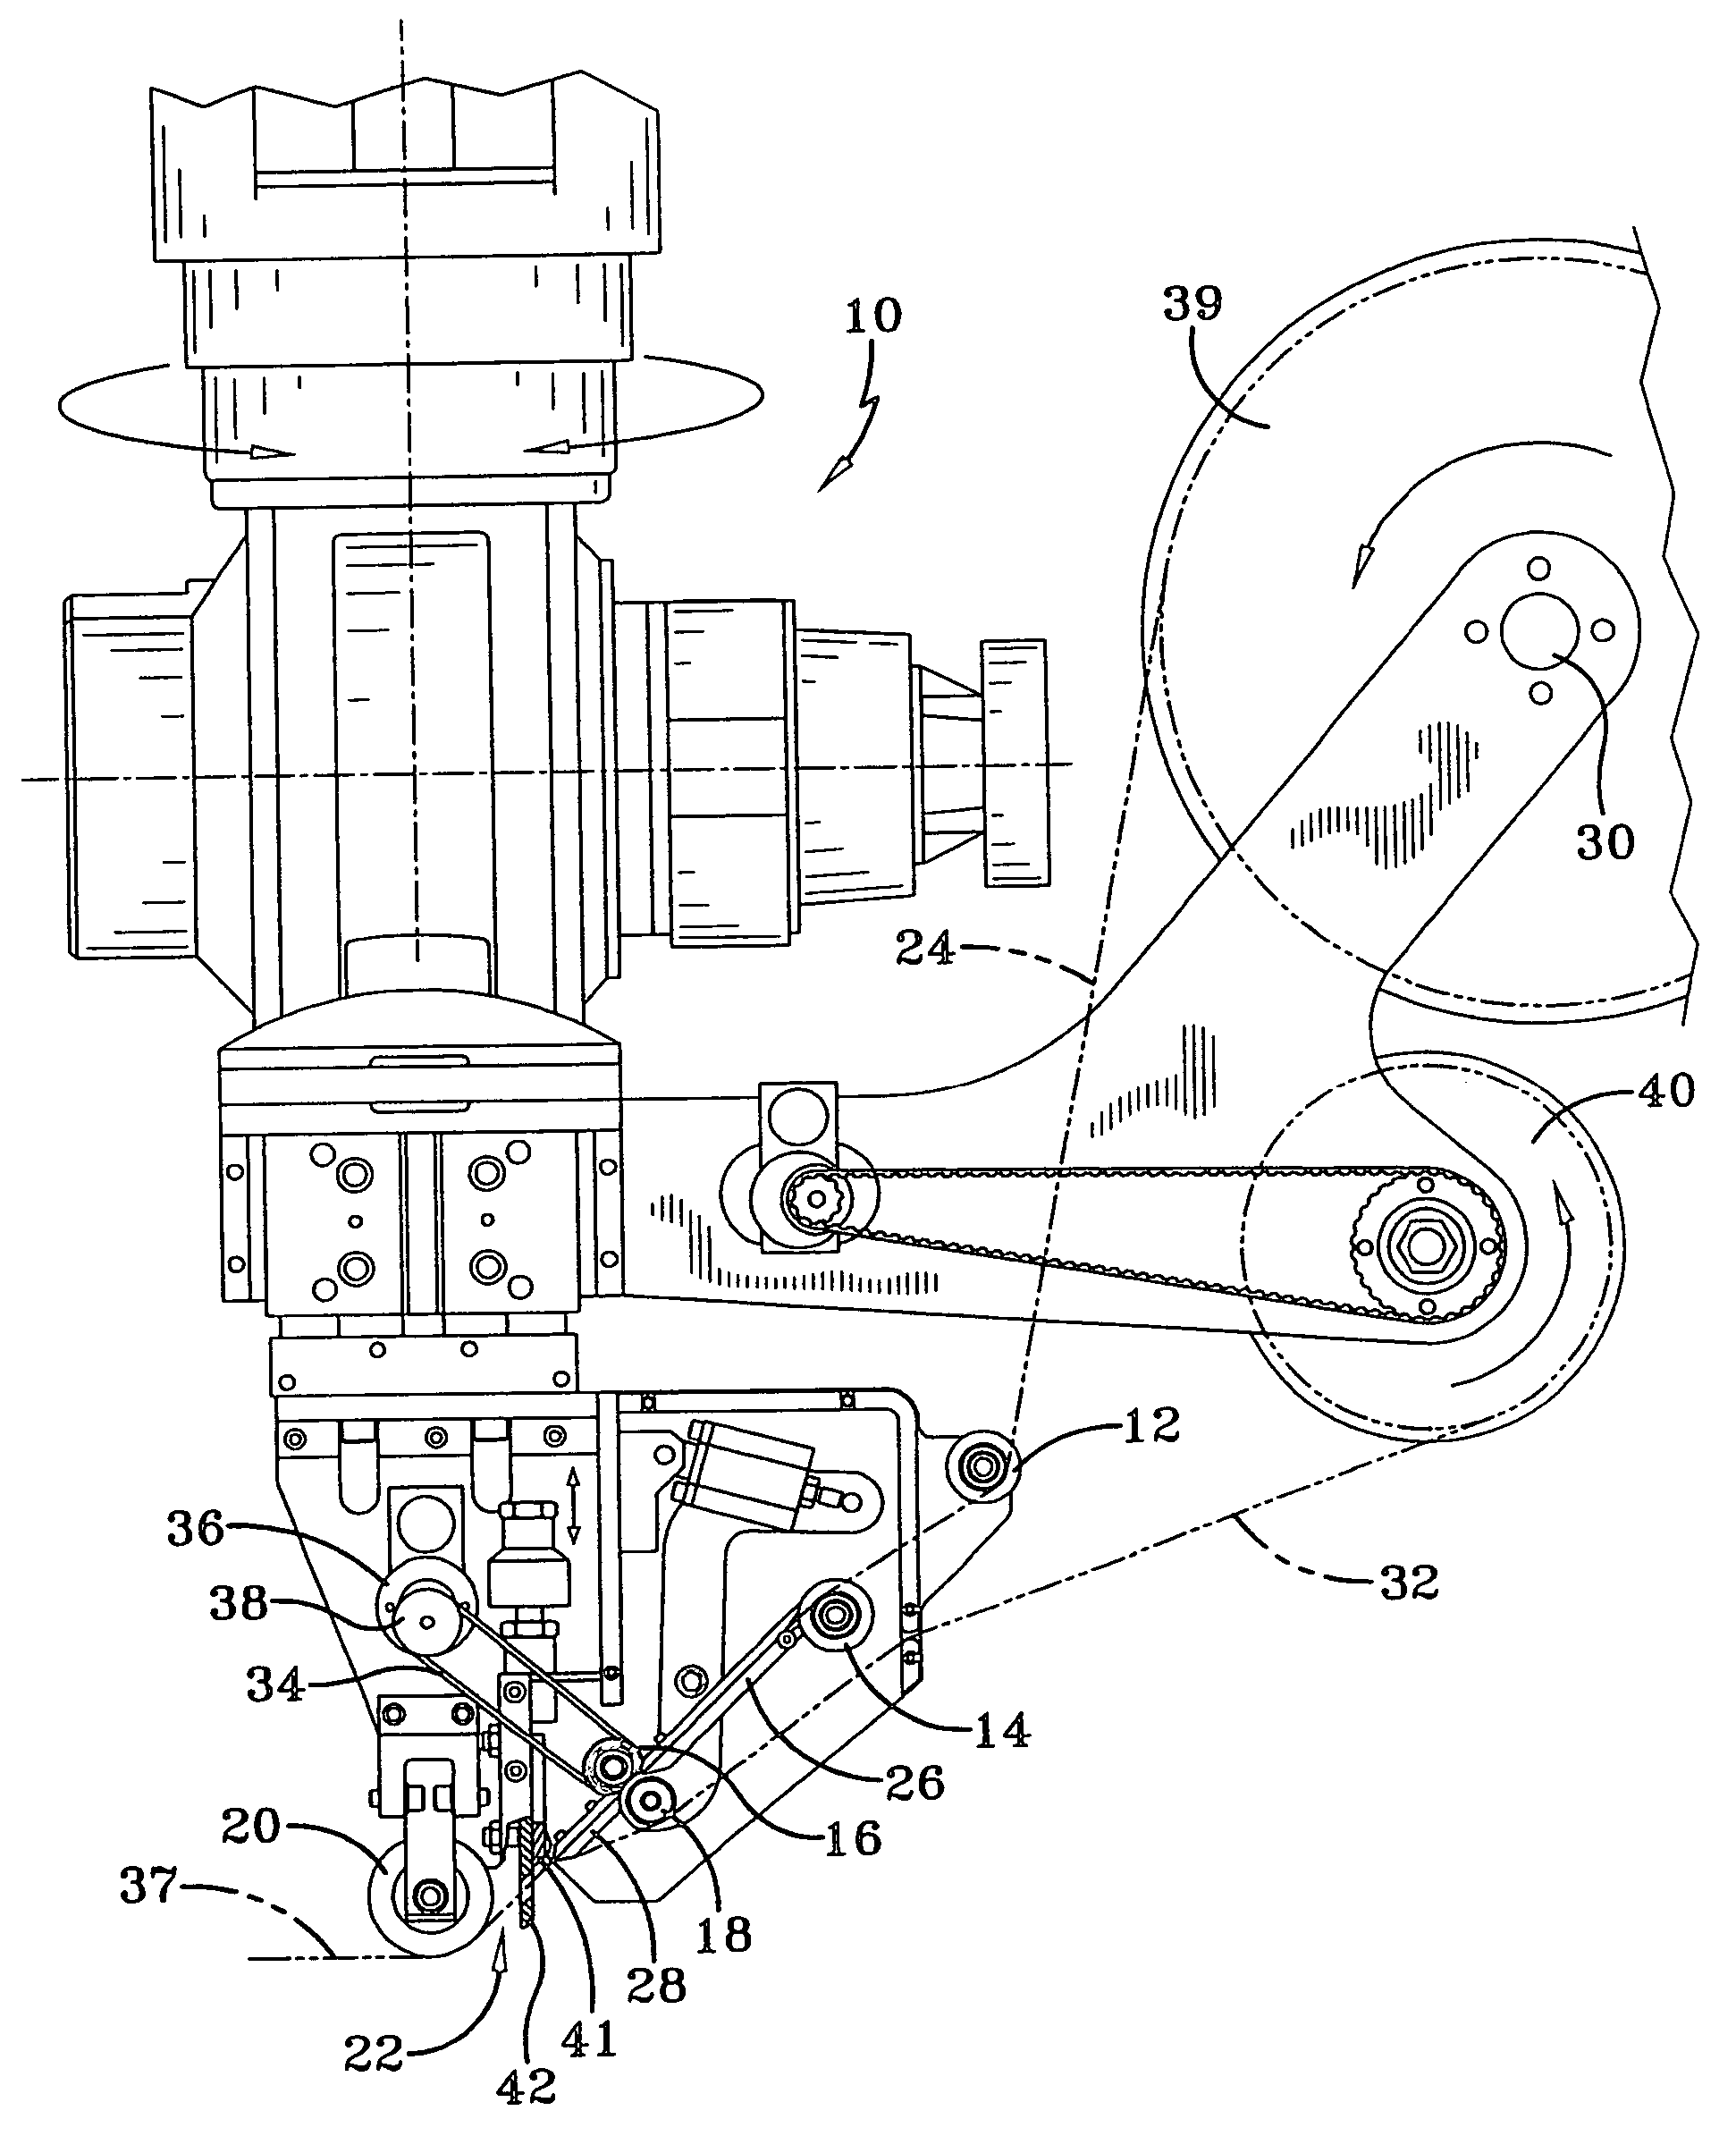 Composite tape laying apparatus and method